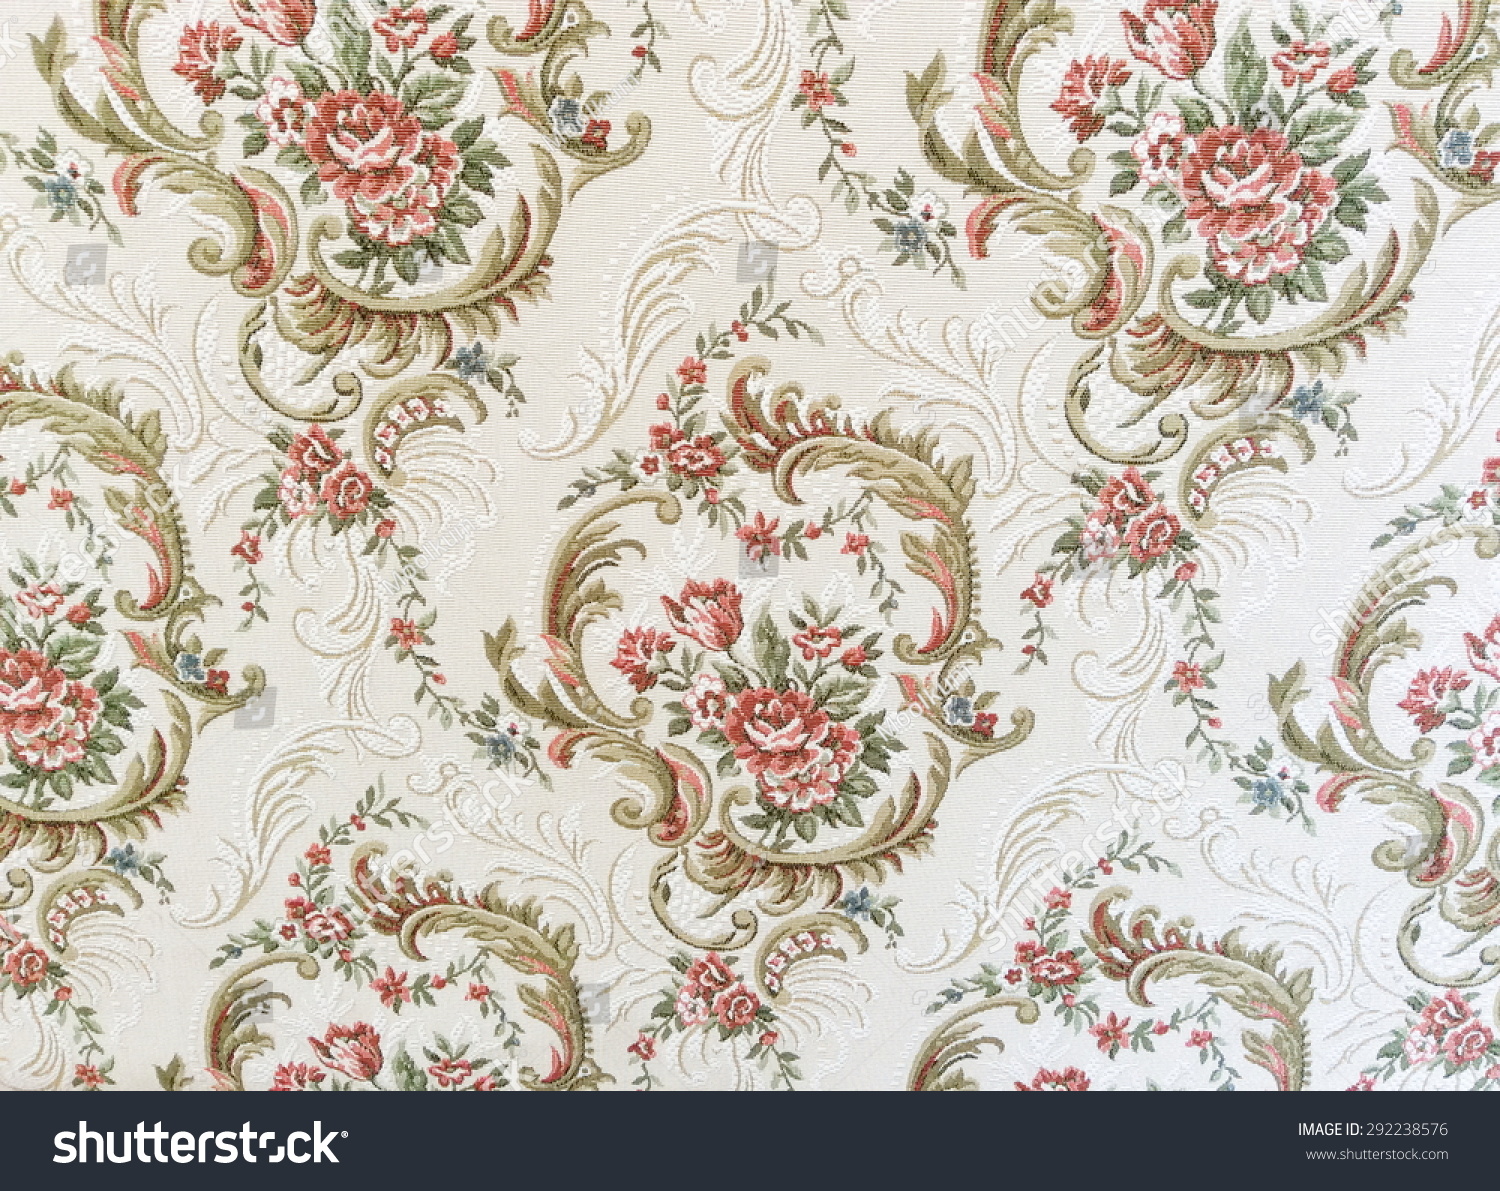 Fragment of colorful retro tapestry textile pattern with floral ornament useful as background #292238576